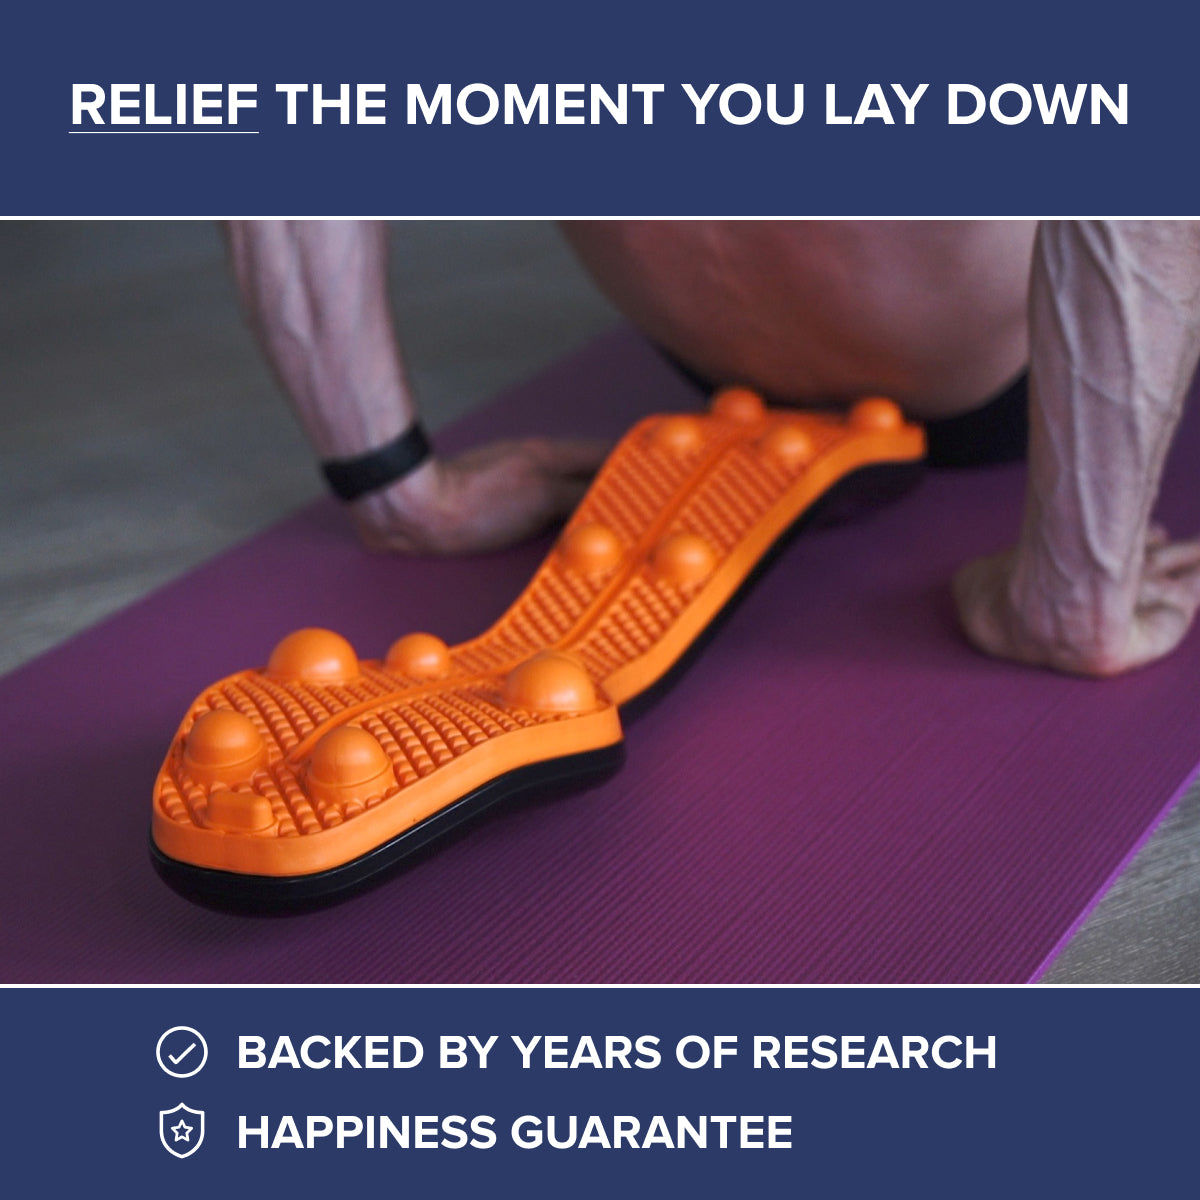 Highlights of the Trigger Point Rocker's capacity to deliver instant relief, backed by research, and accompanied by a happiness guarantee.